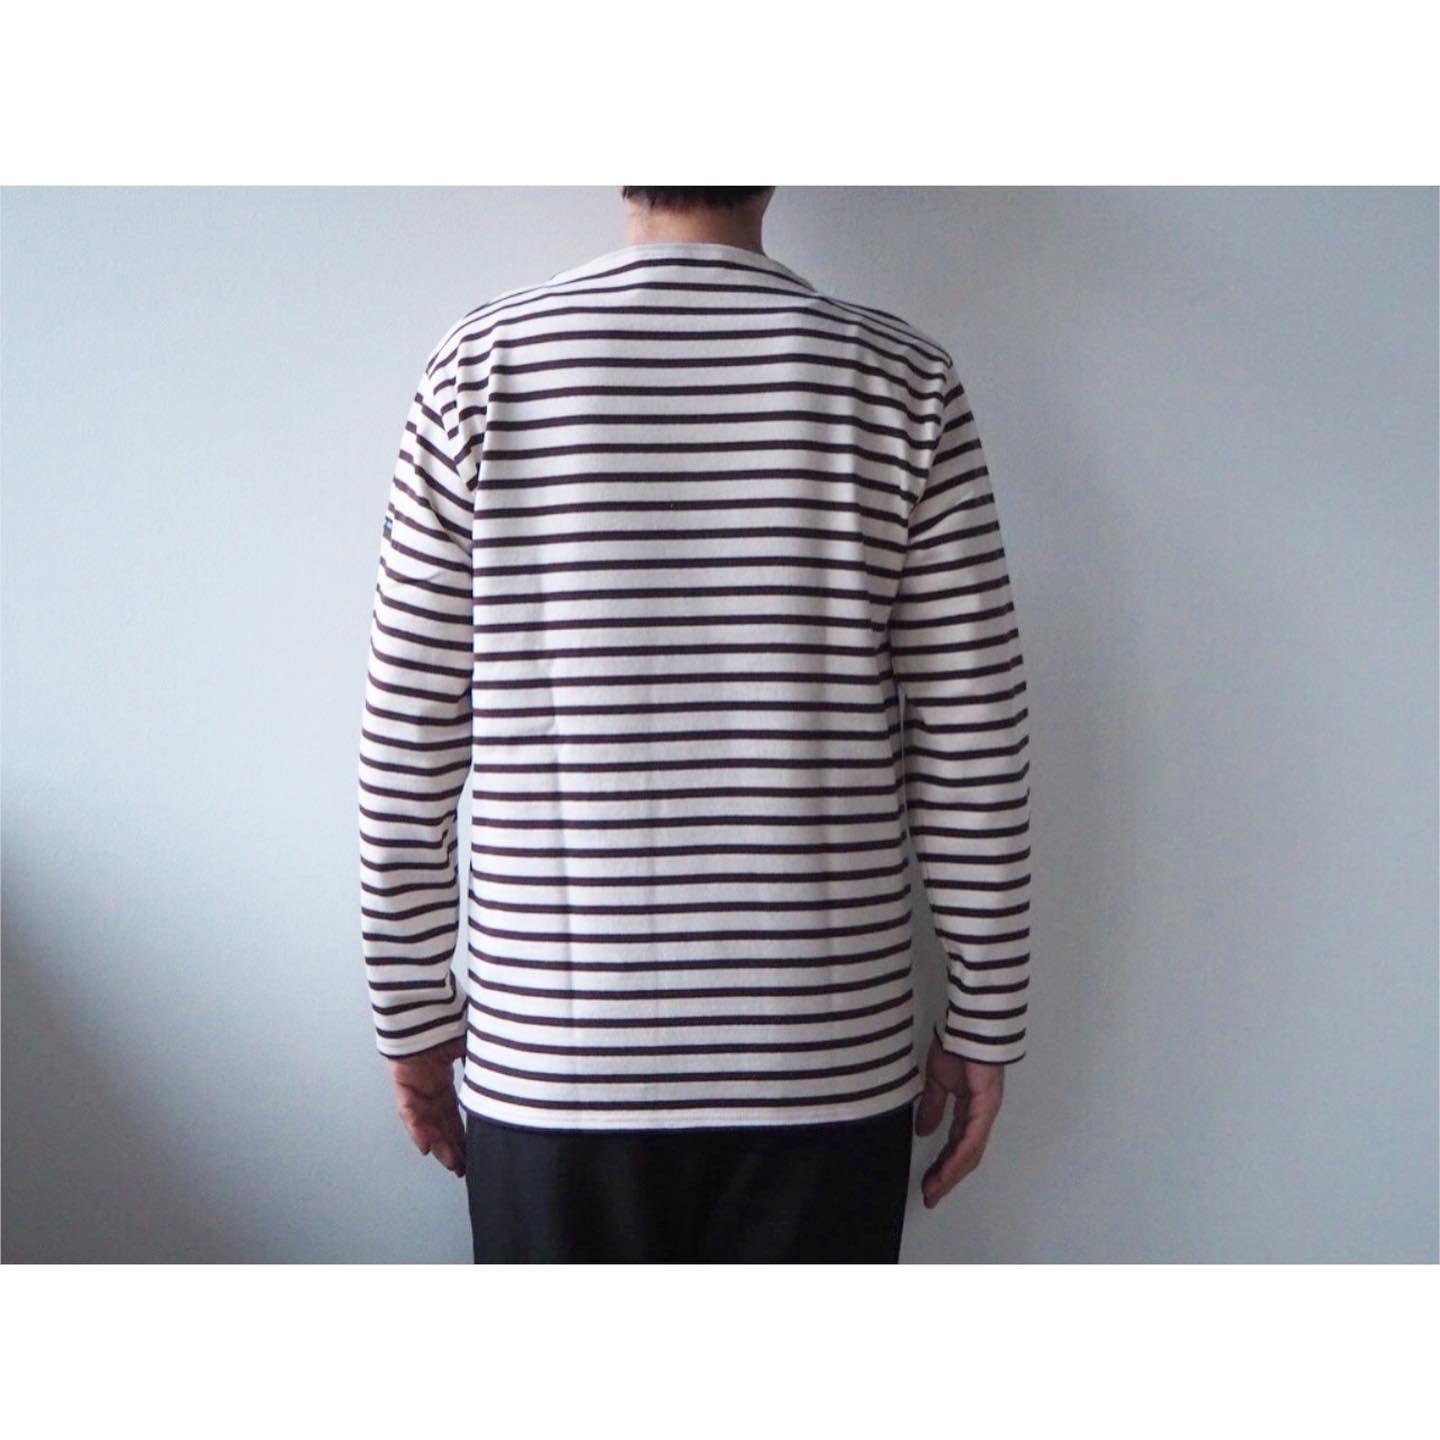 SAINT JAMES(セントジェームス) 『OUESSANT BORDER』Basque Shirt New Color | AUTHENTIC  Life Store powered by BASE